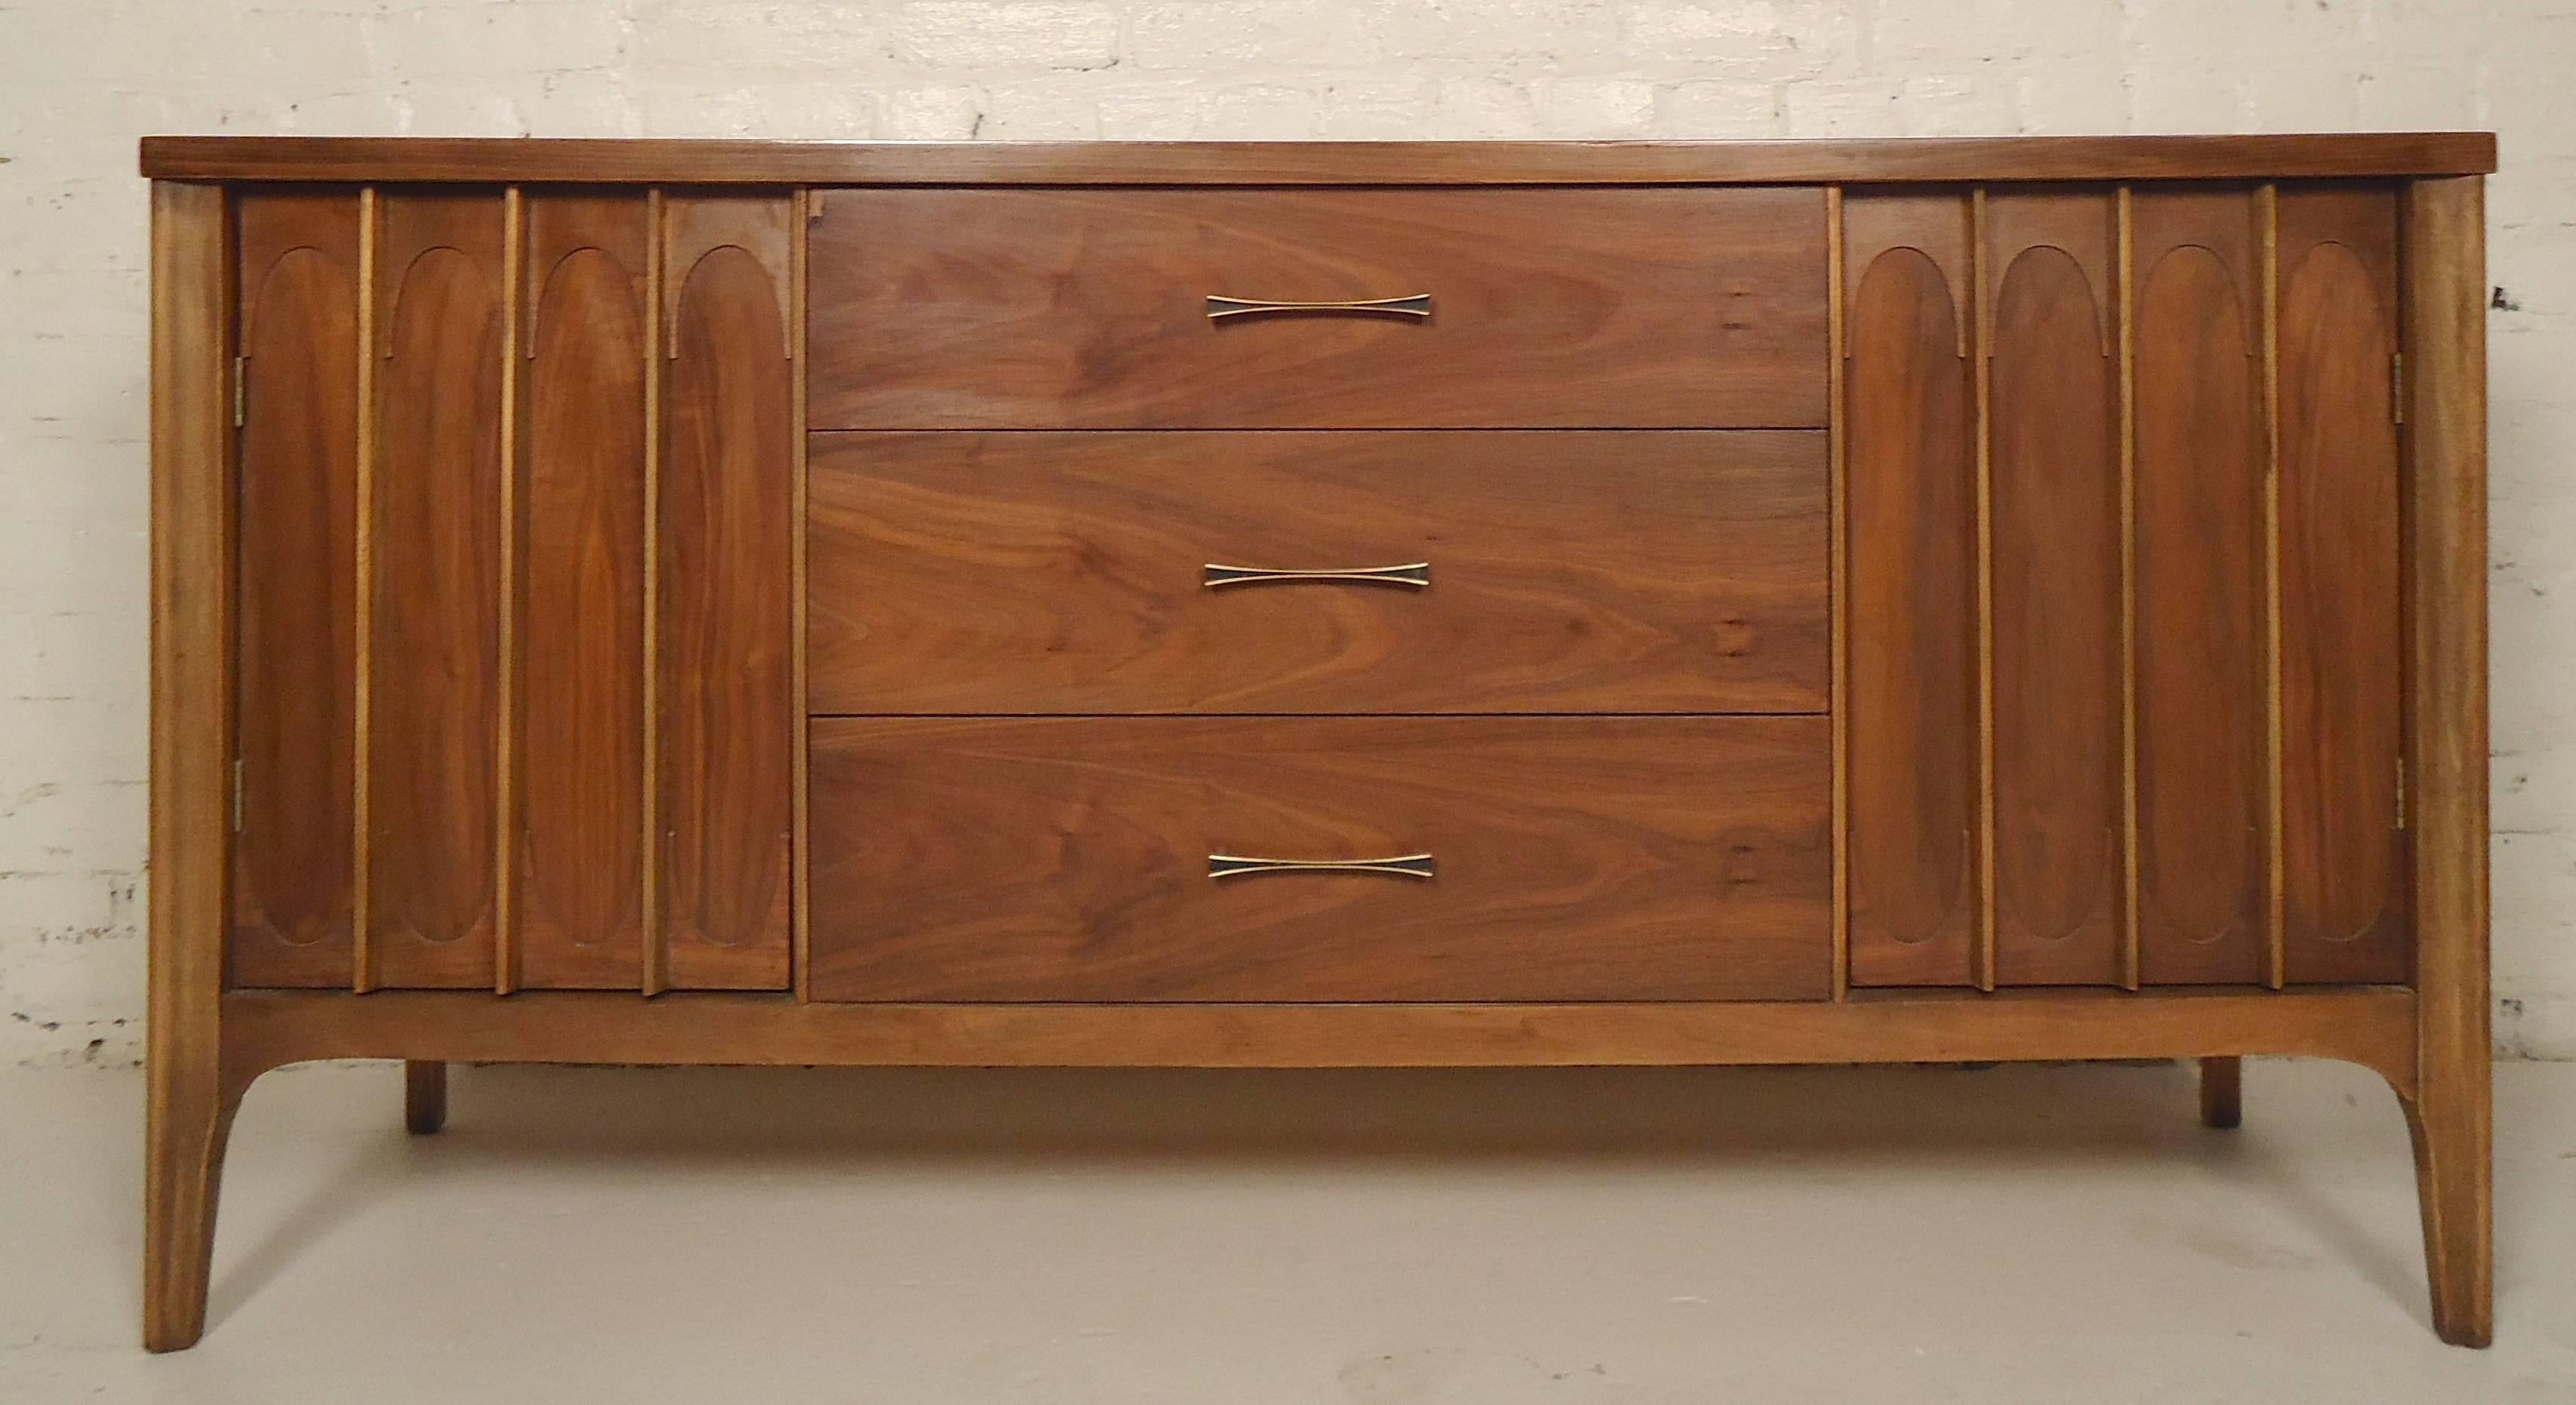 Vintage modern long dresser with wide drawers and side cabinets. Walnut grain, sculpted doors, brass colored handles. Great for bedroom or living room.

(Please confirm item location - NY or NJ - with dealer).
 